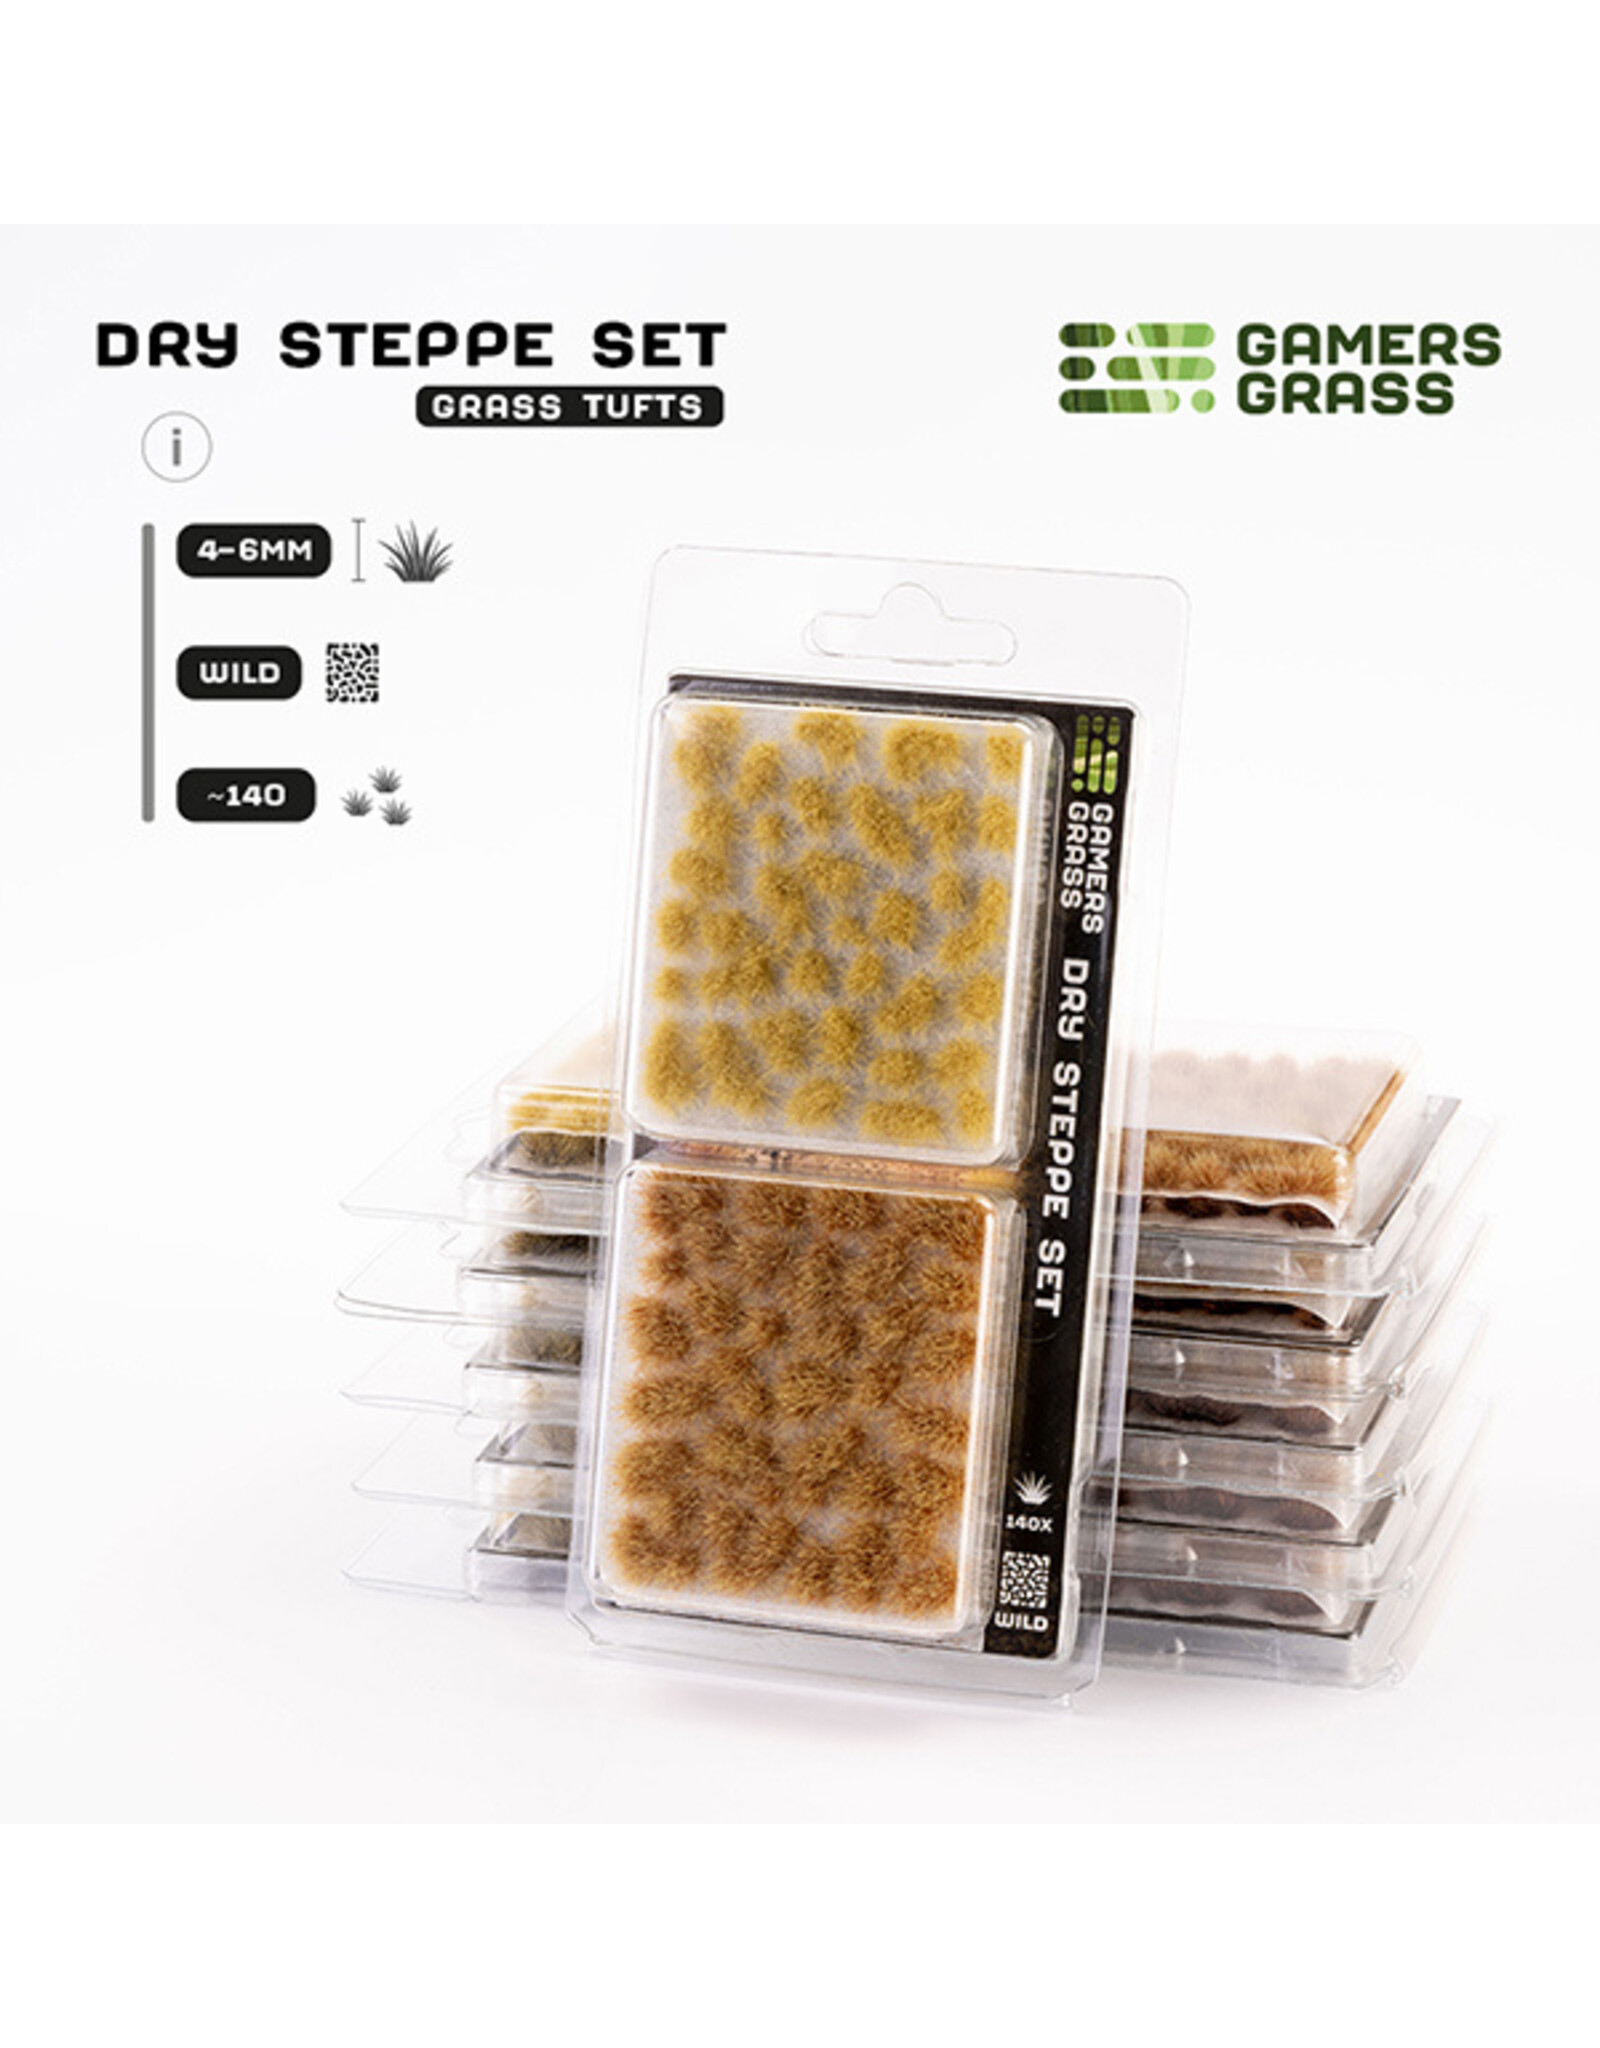 Gamers Grass Gamers Grass Tufts: Tuft Sets- Dry Steppe Set- Wild